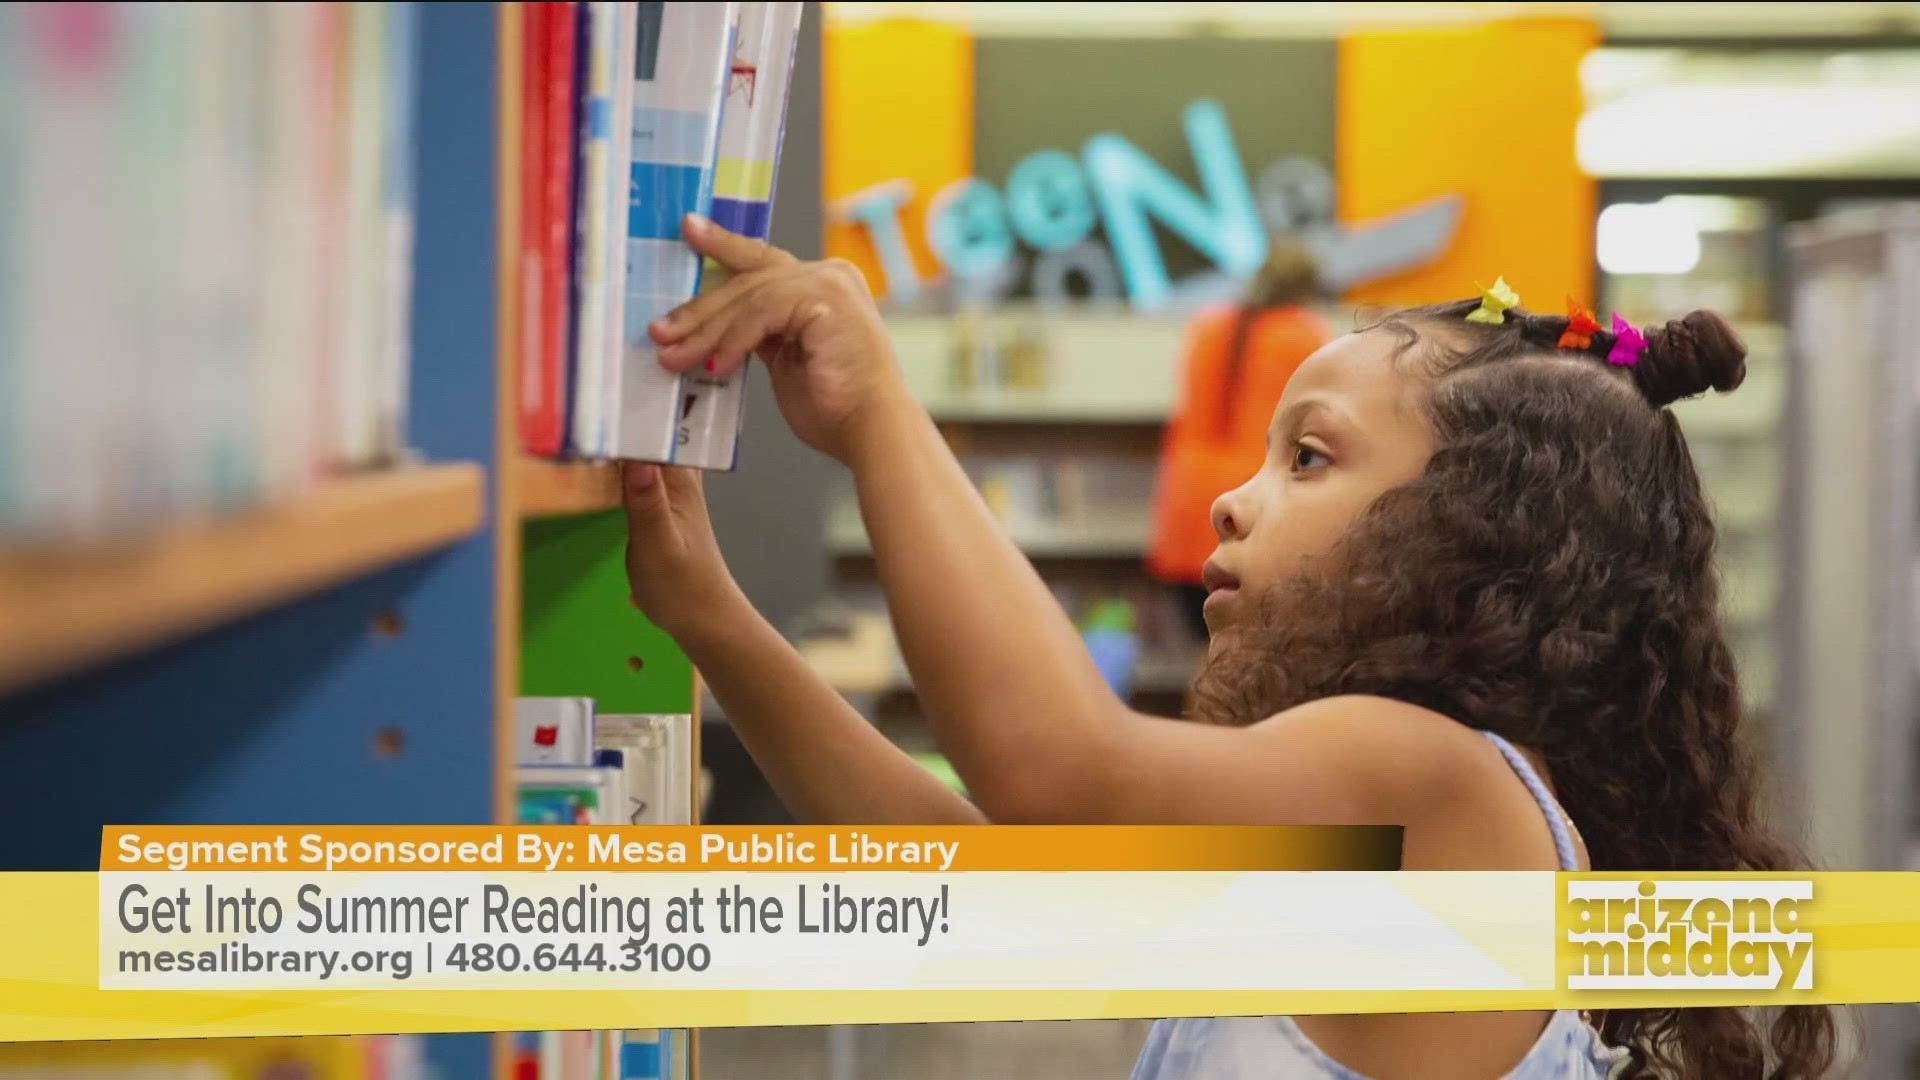 Sara Lipich with Mesa Public Library shares why reading during the summer is so important for kids and tells us about a program to help keep the page turning!